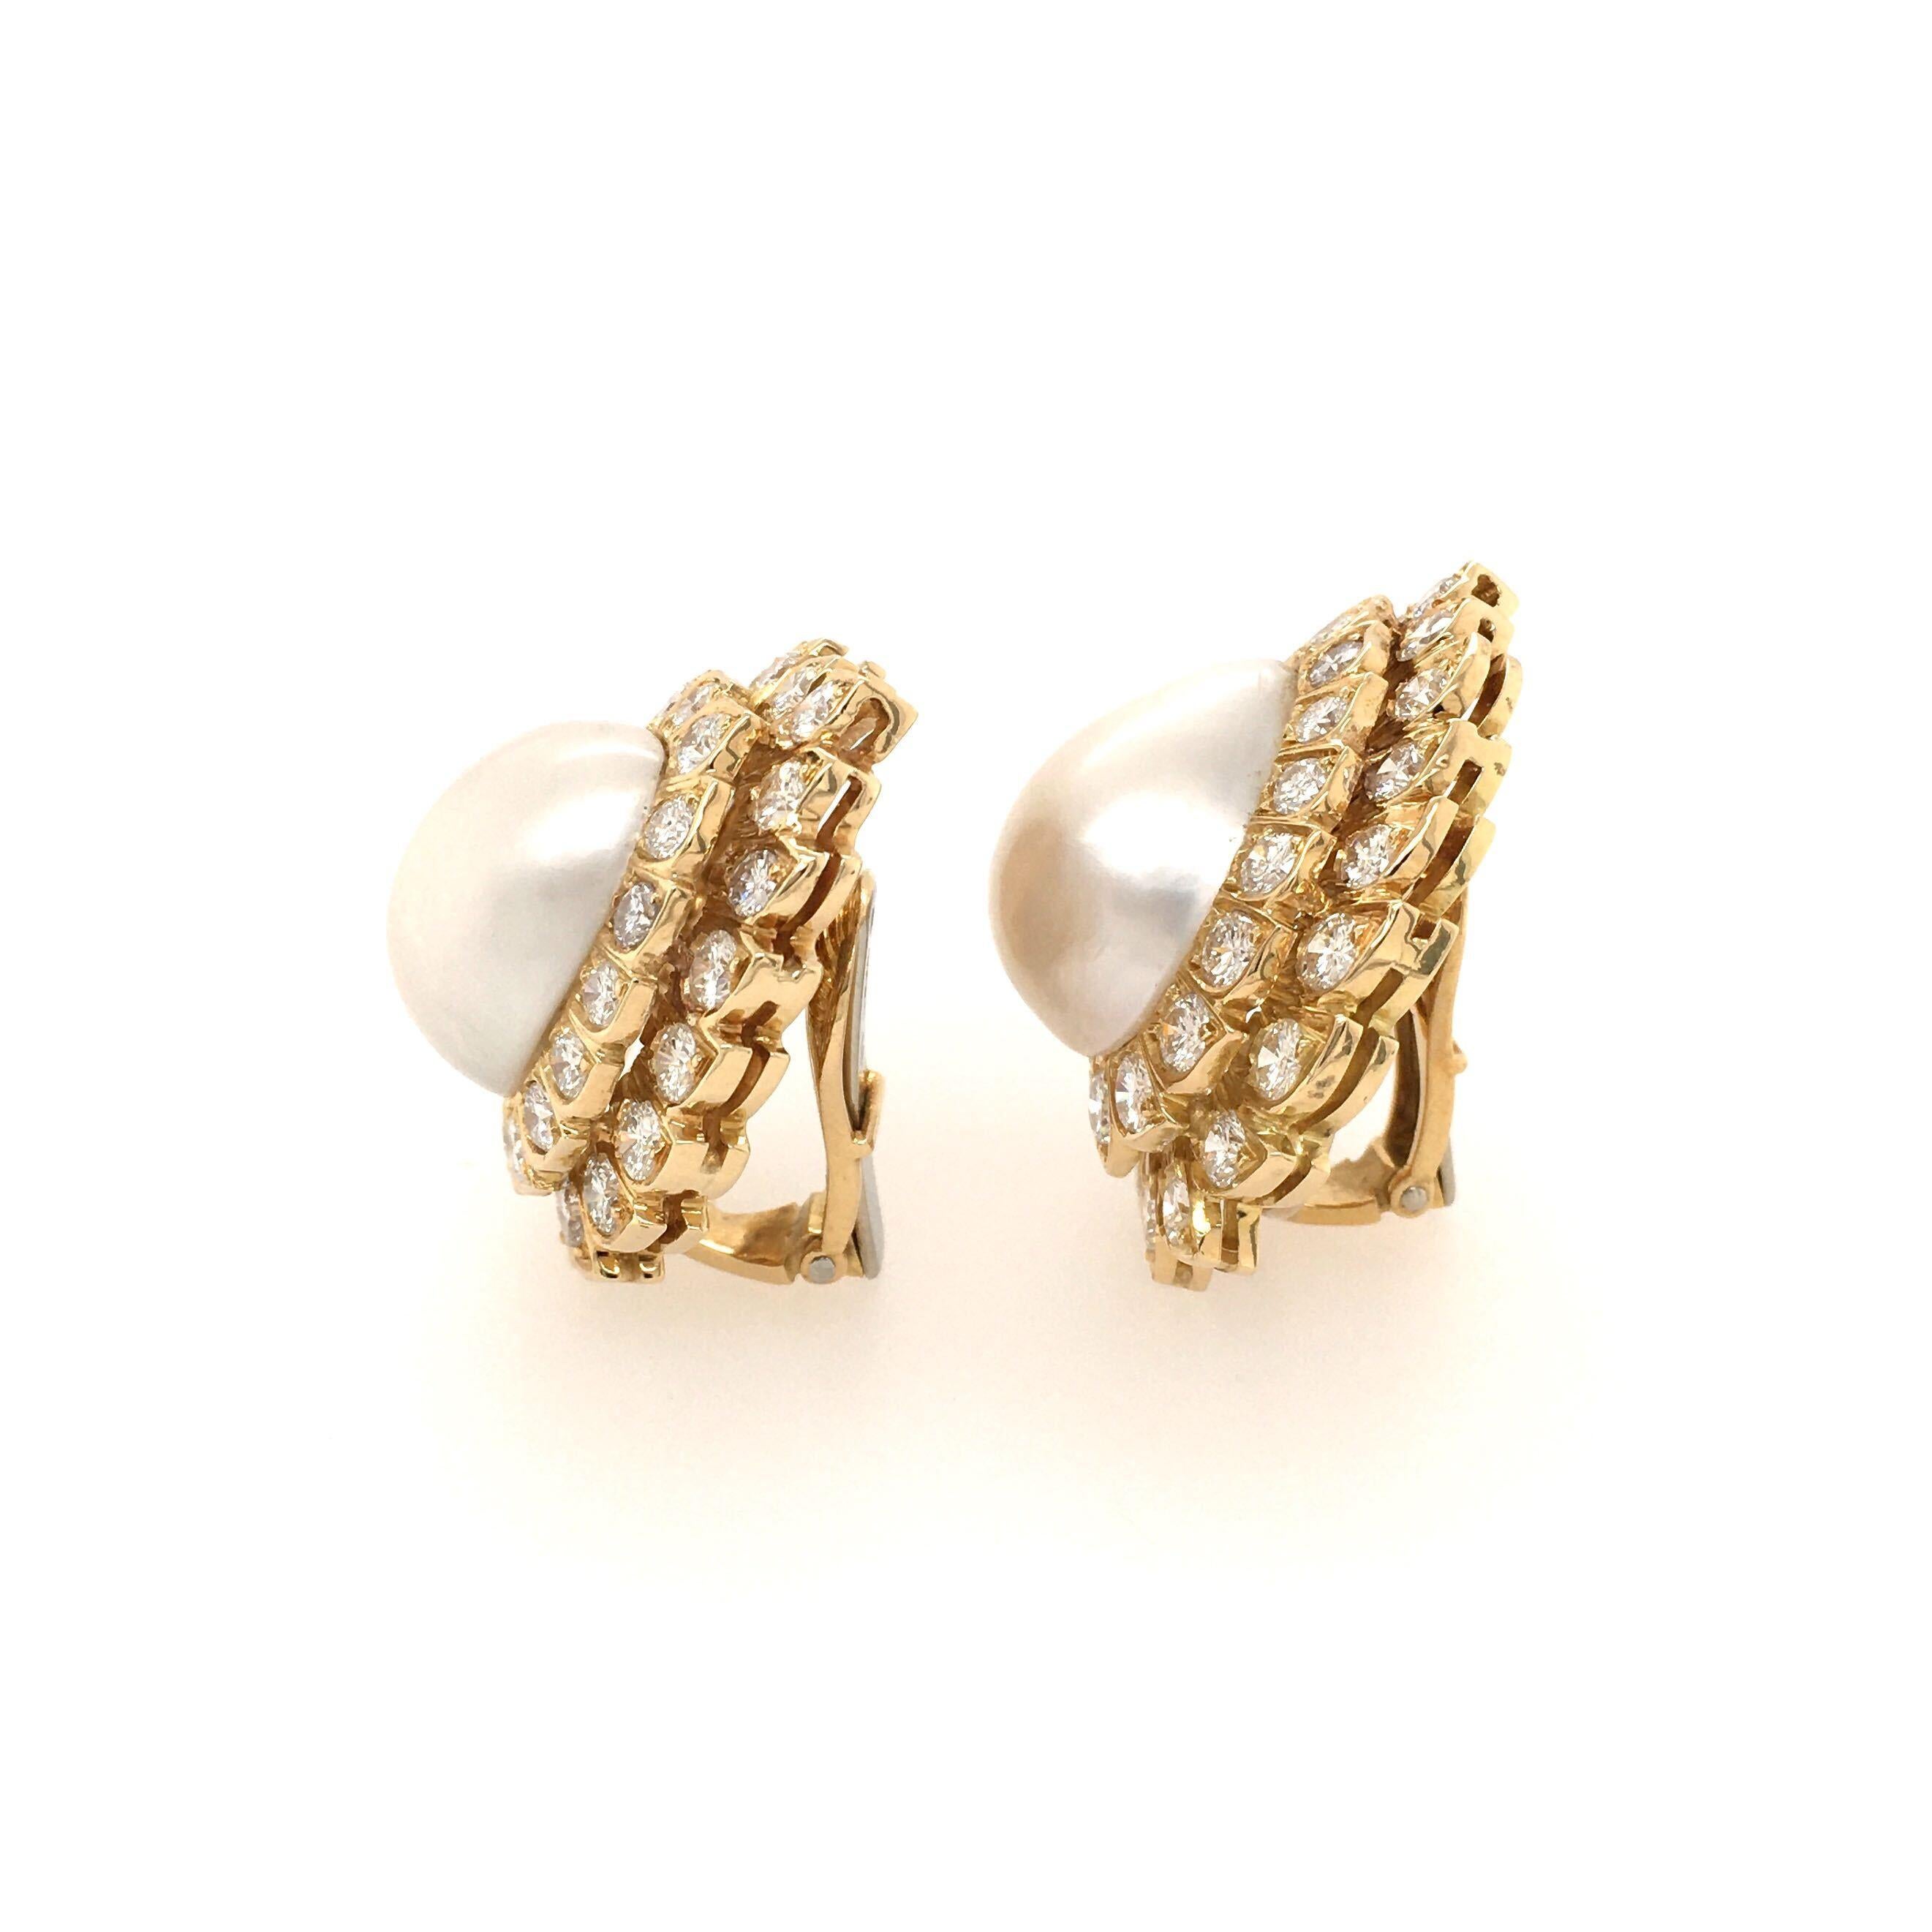 A pair of 18 karat yellow gold, pearl and diamond earclips, David Webb.  Each earclip centering a pear shaped mabe pearl surrounded by thirty four (34) brilliant cut diamonds of various sizes in two tiers.  Length approximately 1 1/4 inches.  Gross